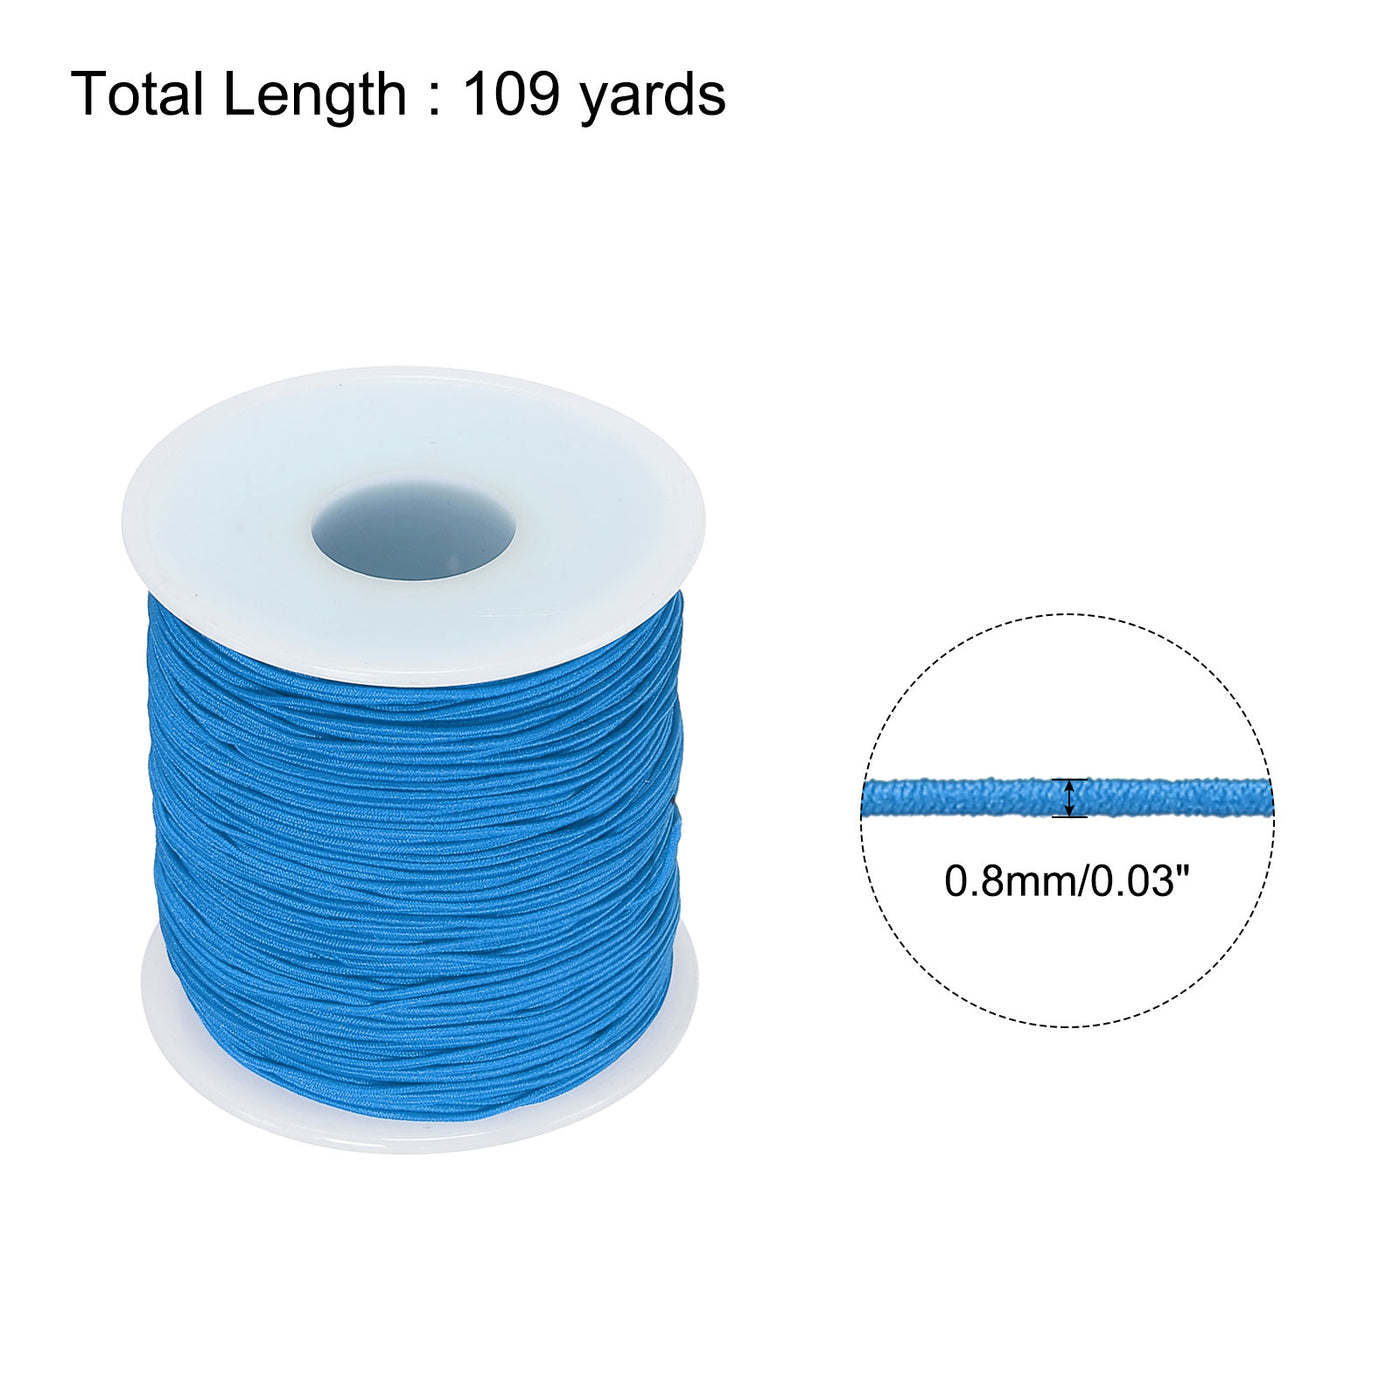 Harfington Elastic Cord Stretchy String 0.8mm 109 Yards Sky Blue for Crafts, Jewelry Making, Bracelets, Necklaces, Beading